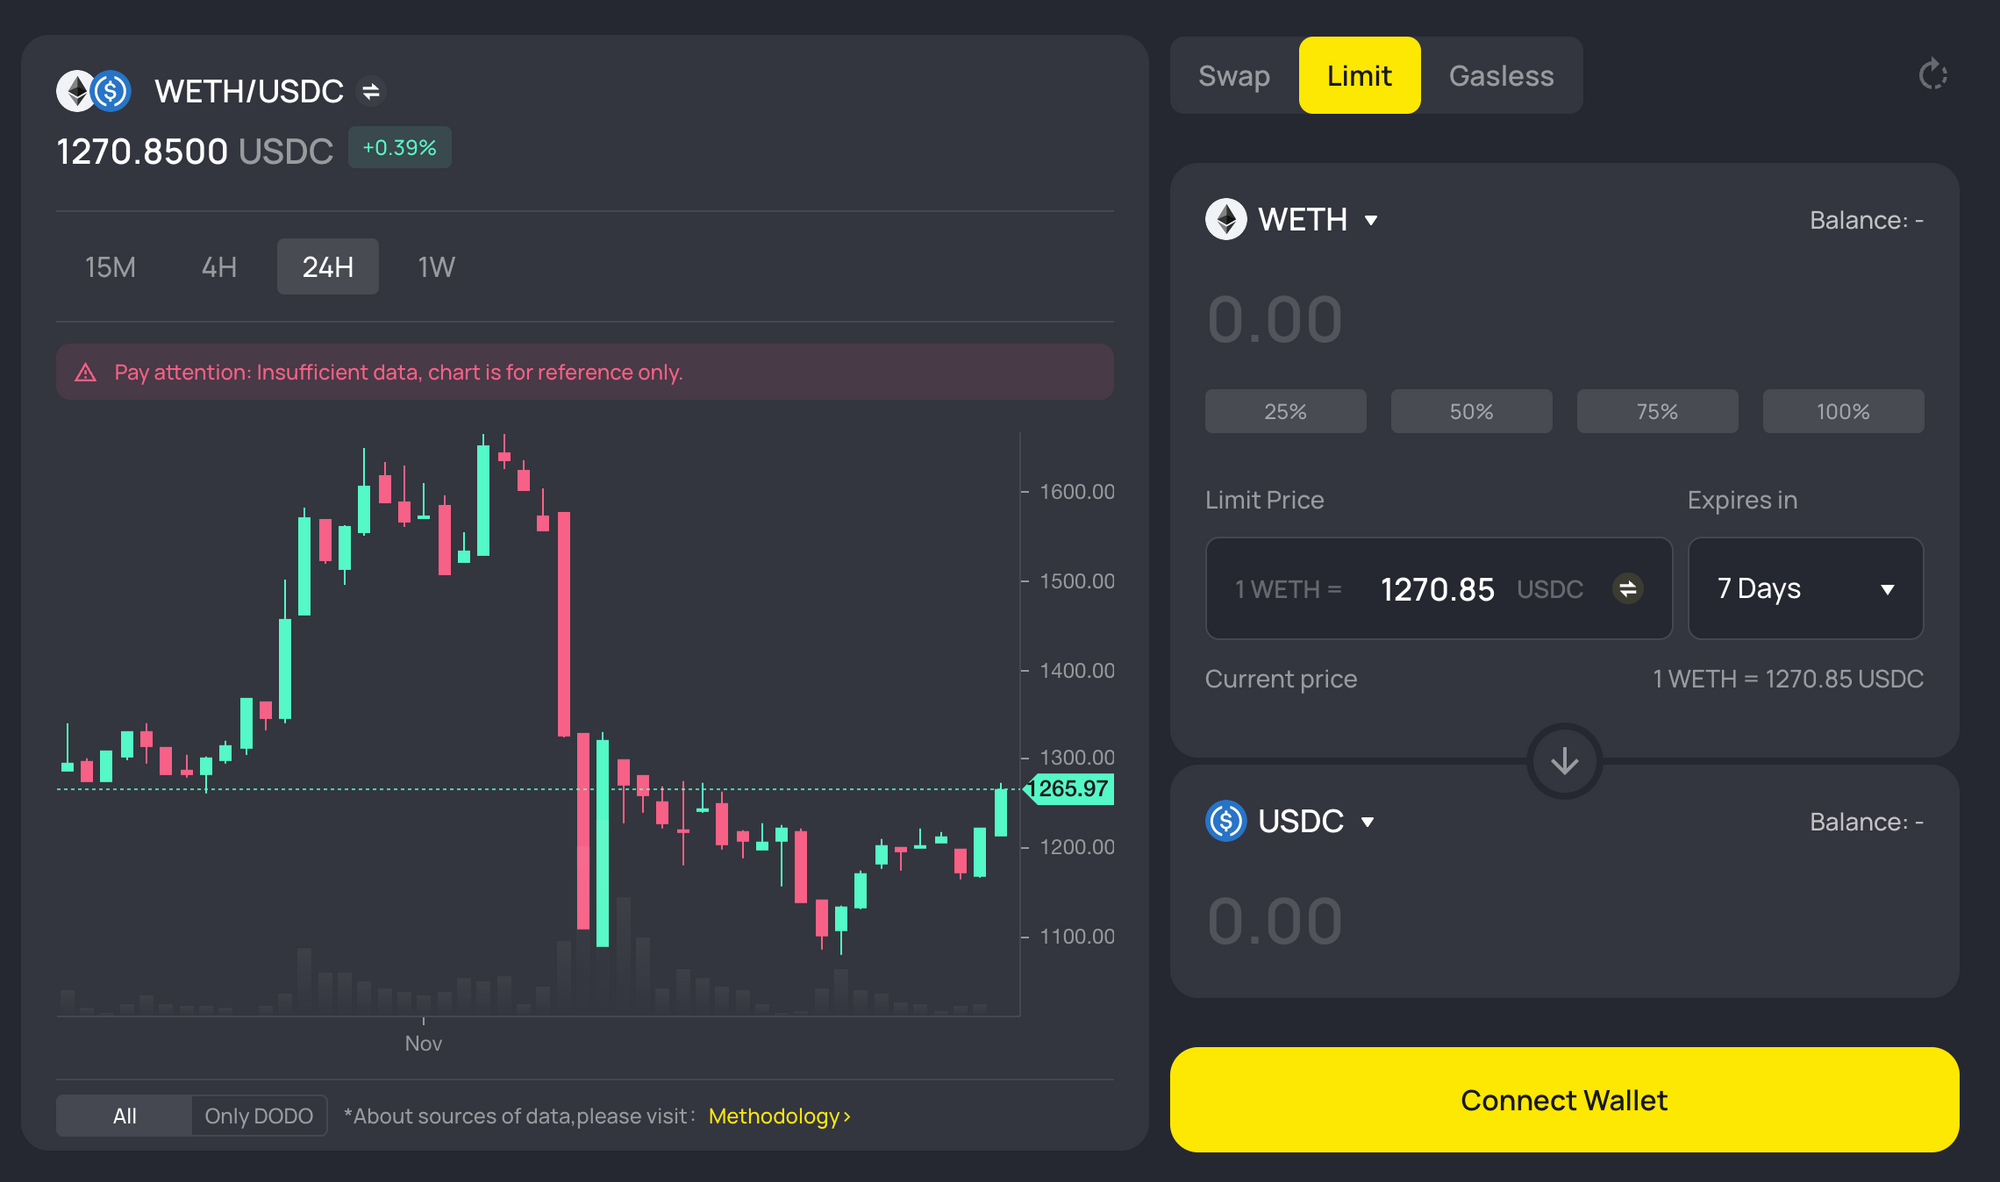 DODO DEX provides candlestick view, limit order, and gas-free trading functions.